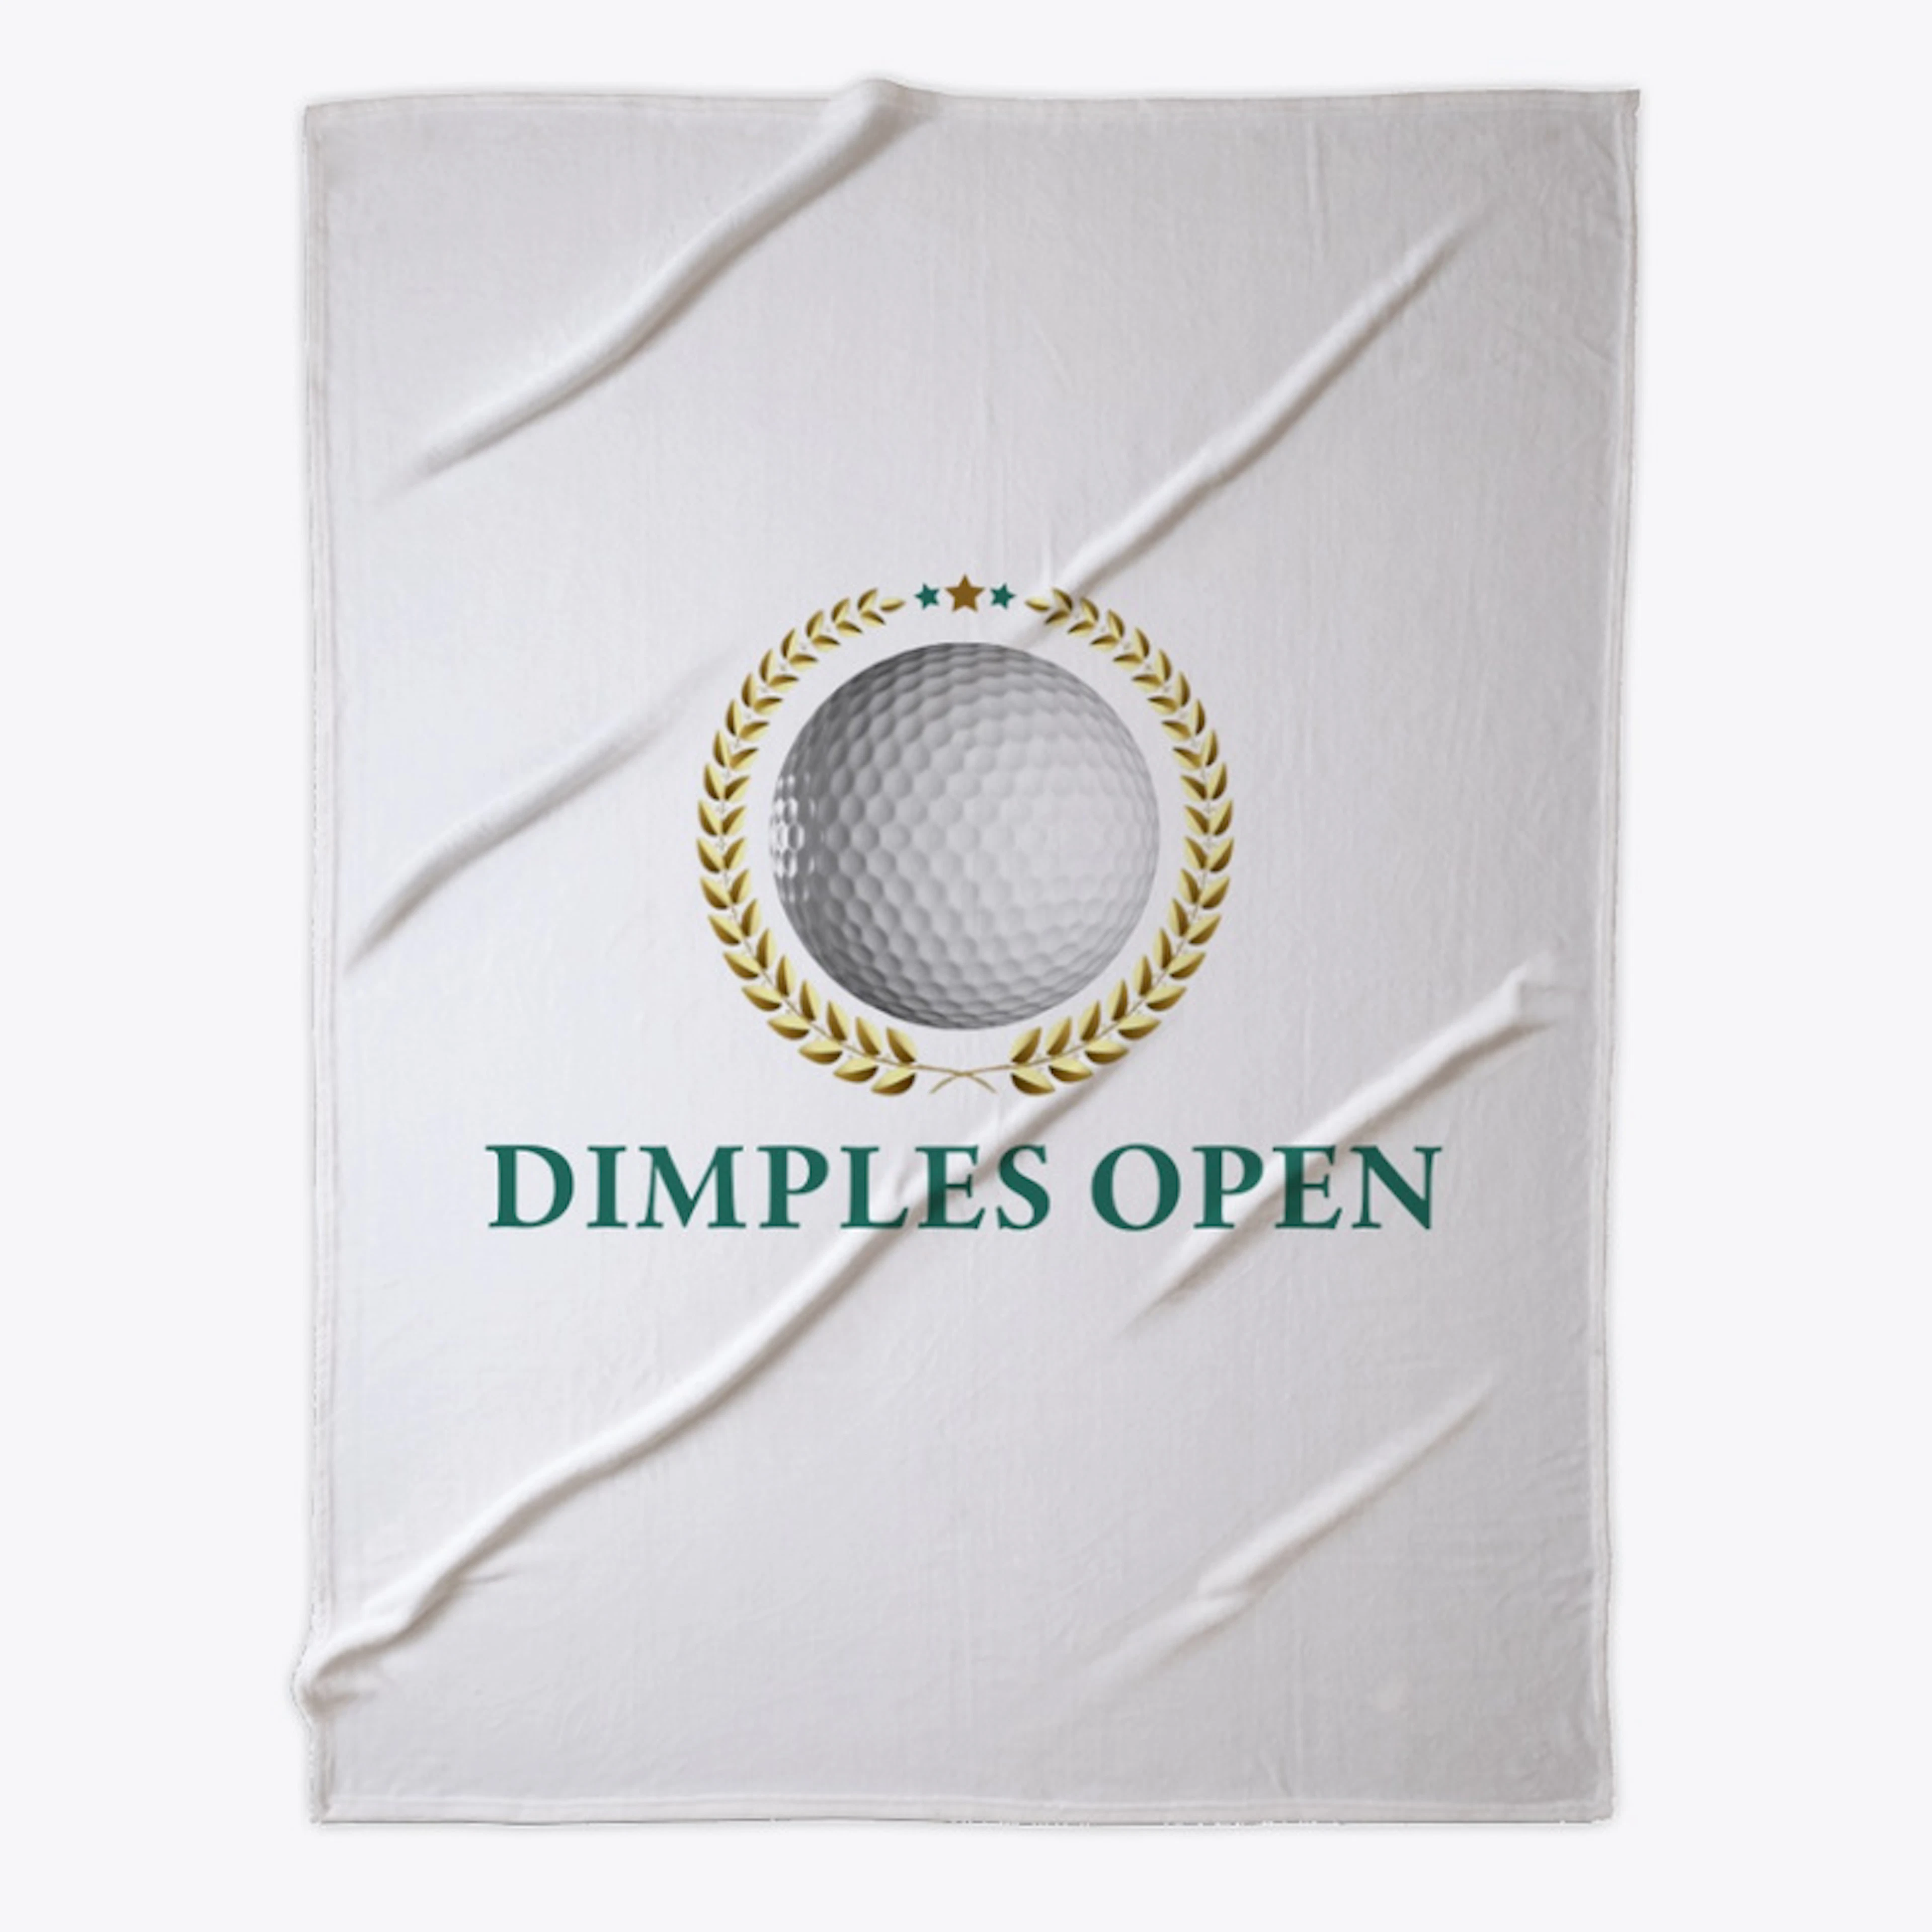 Dimples Open Golf Apparel